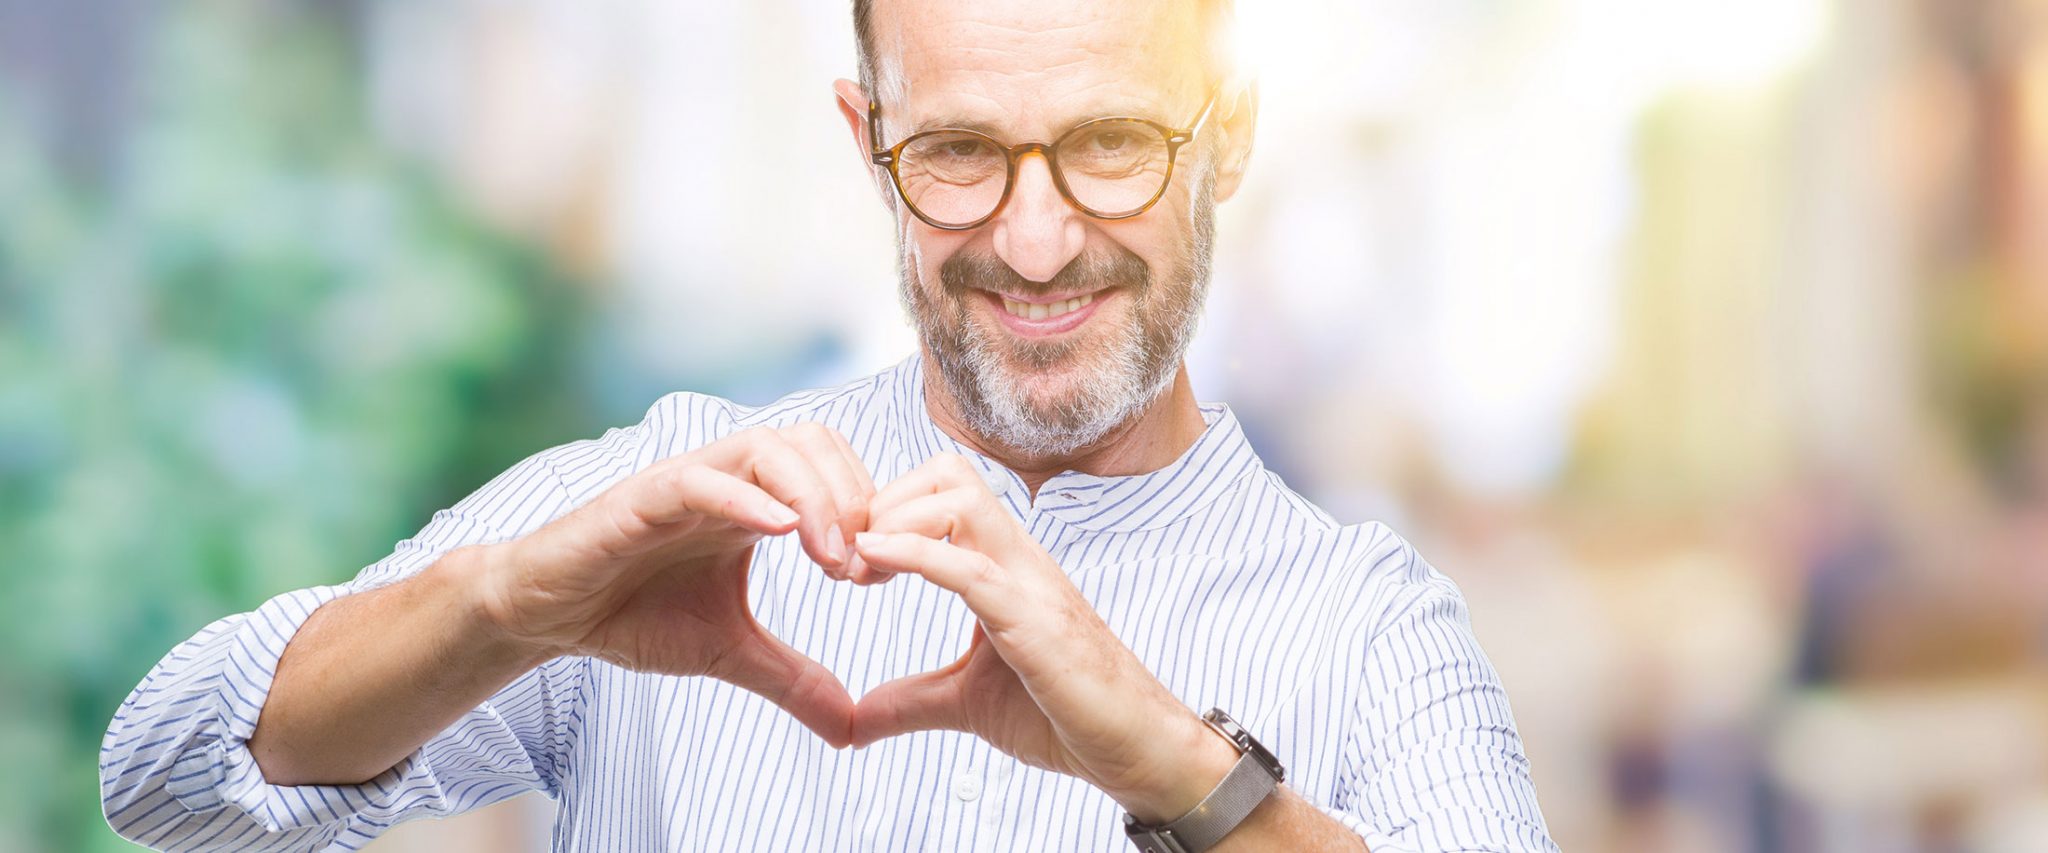 man making a heart shape with his fingers